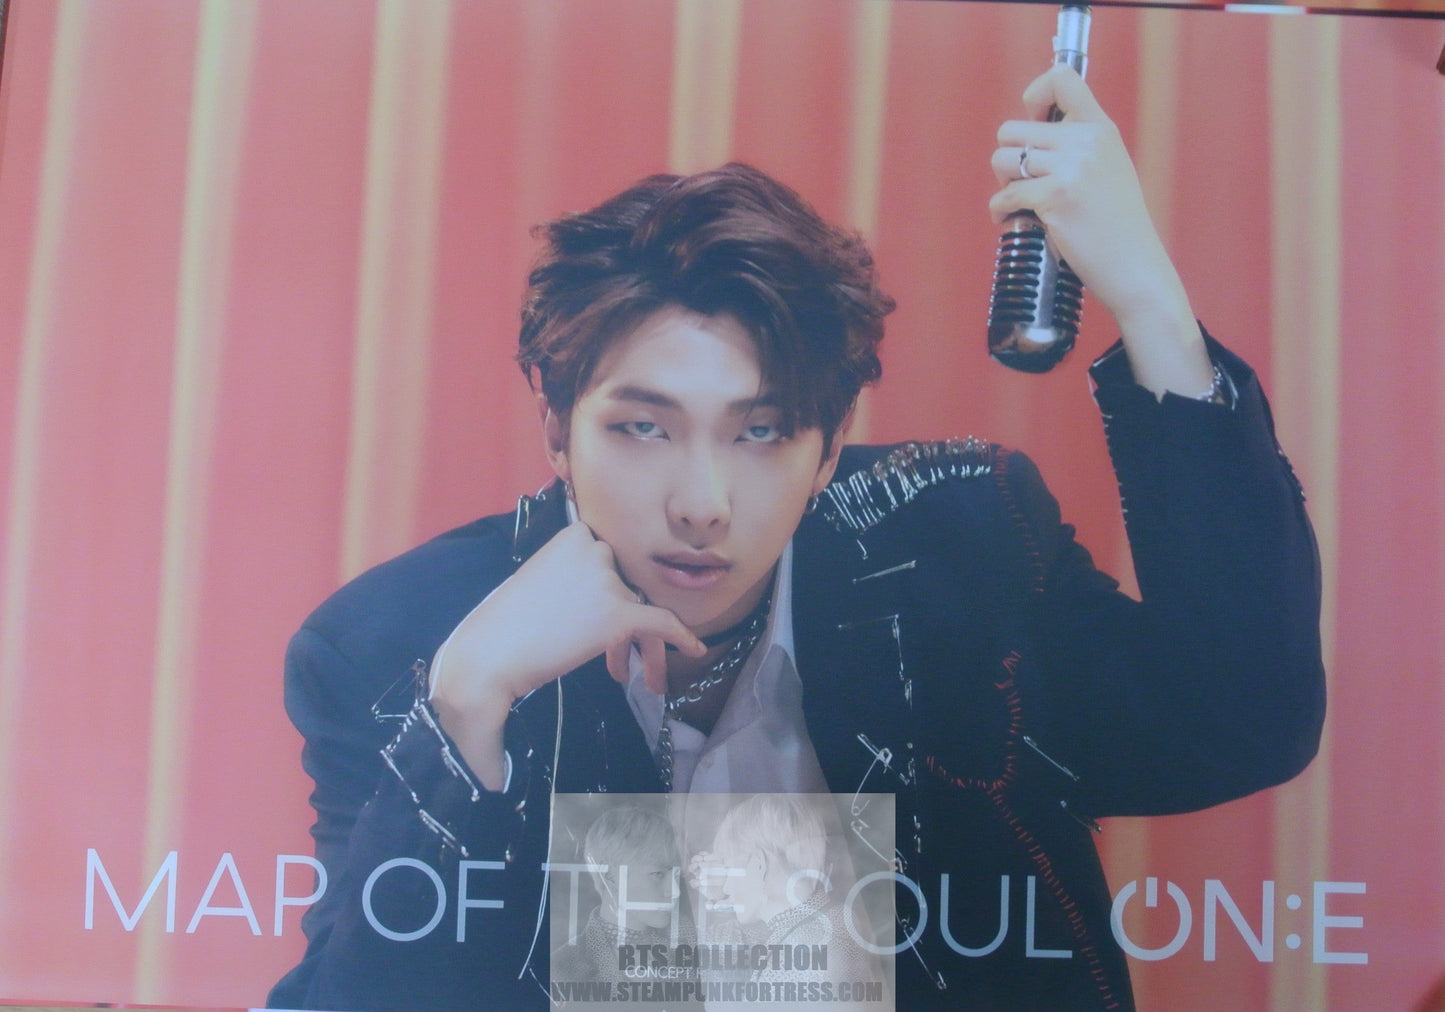 BTS RM KIM NAMJOON NAM-JOON POSTER PHOTO FROM MAP OF THE SOUL ON:E ONE BOOK SPECIAL 2 SET FIRST EDITION LIMITED VERSION NEW OFFICIAL MERCHANDISE 24" X 36"